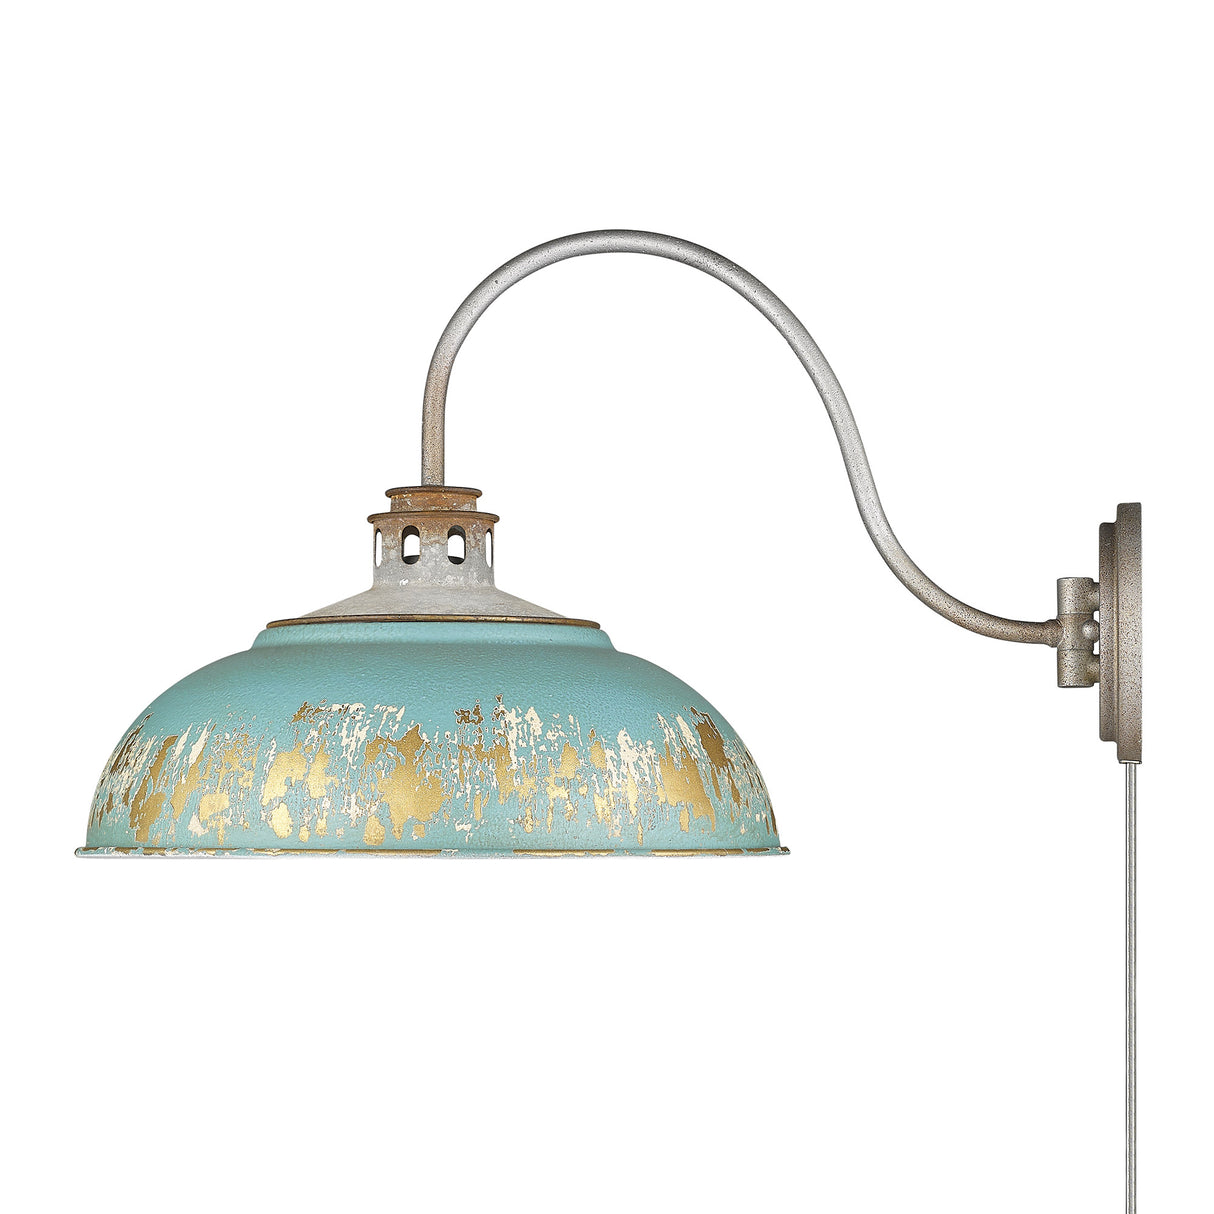 Kinsley 1 Light Articulating Wall Sconce in Aged Galvanized Steel with Antique Teal Shade